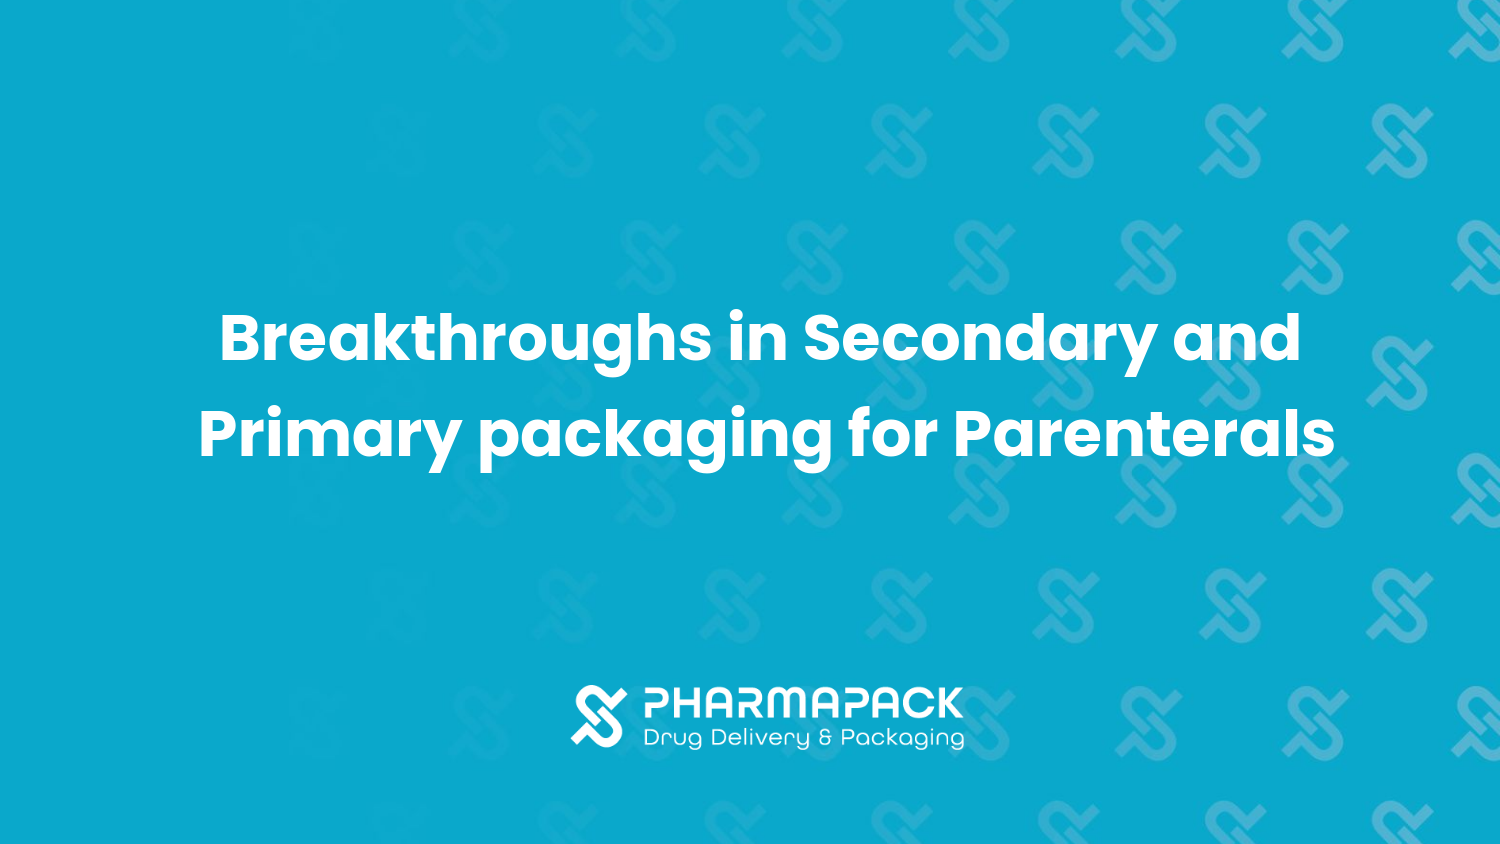 Breakthroughs in Secondary and Primary Packaging for Parenterals